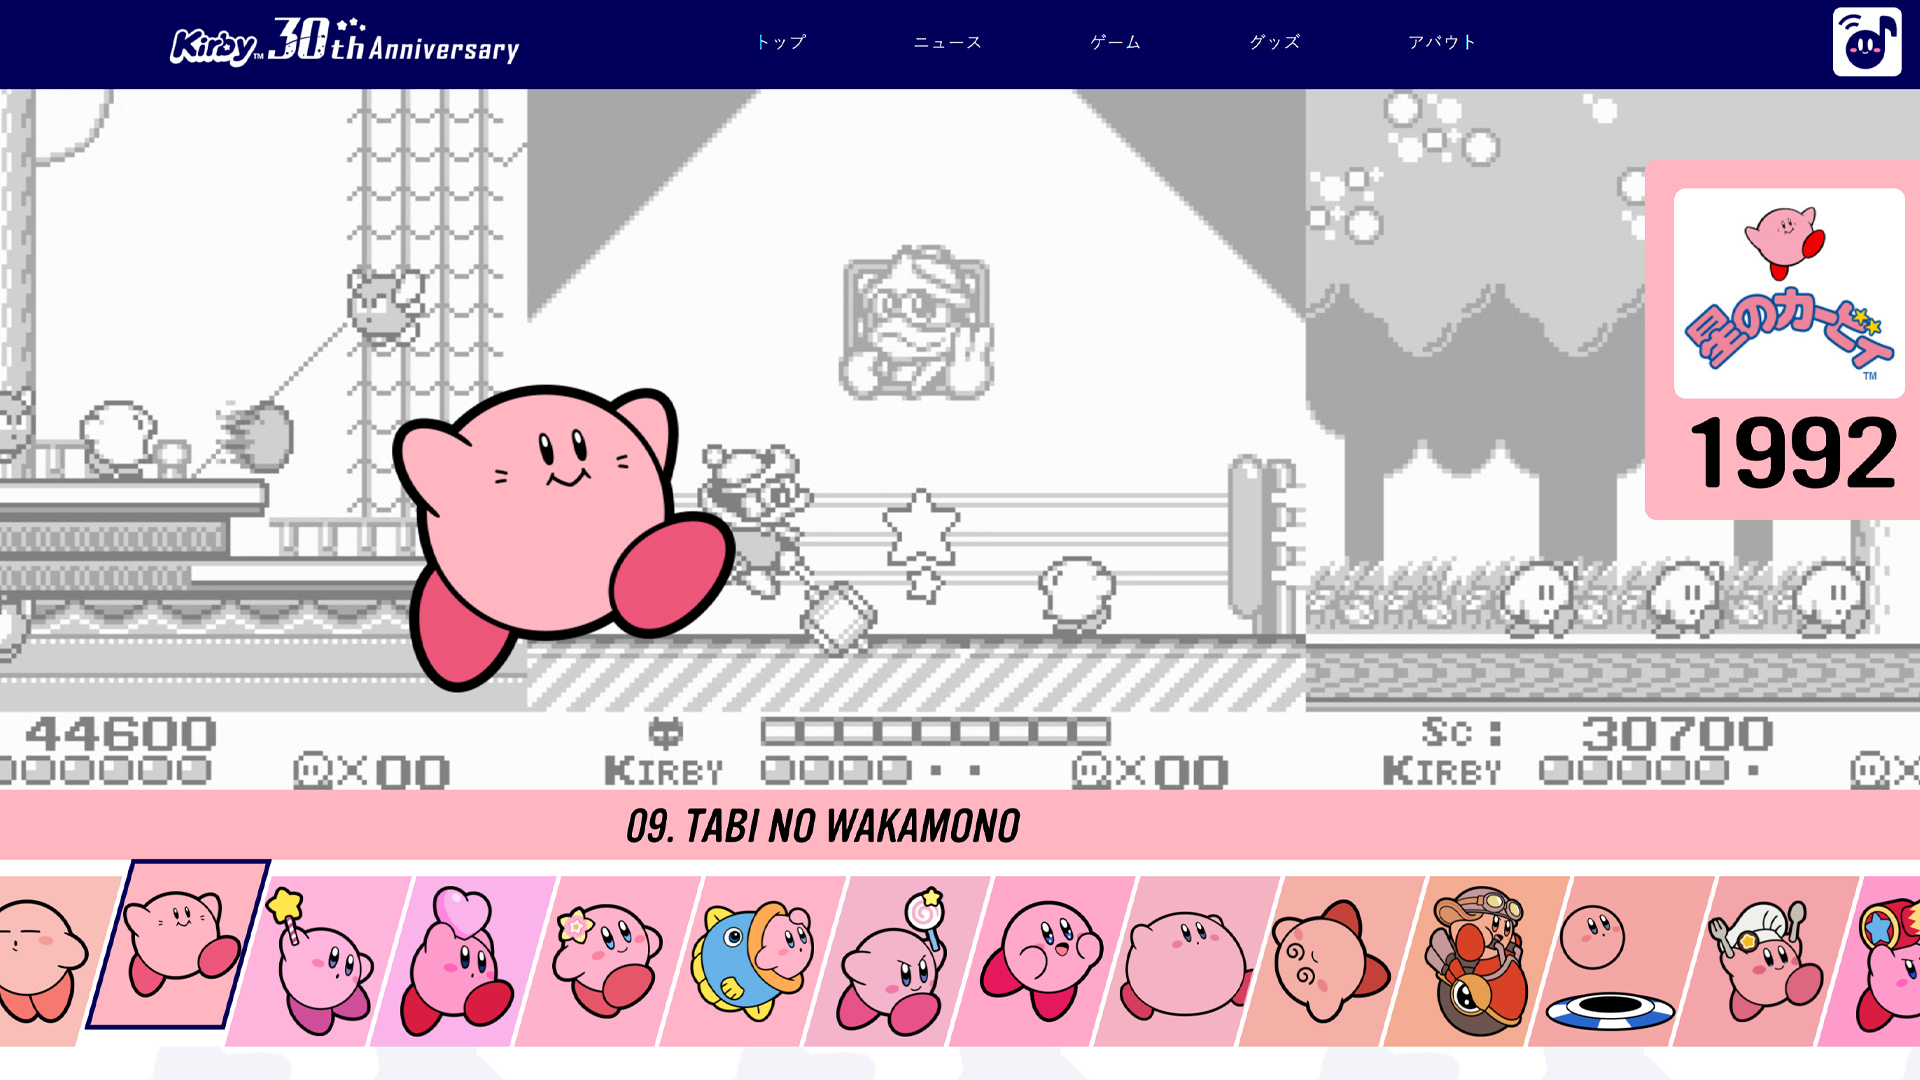 Kirby 30th Anniversary Wallpaper Translation of 29 Japanese references  r Kirby